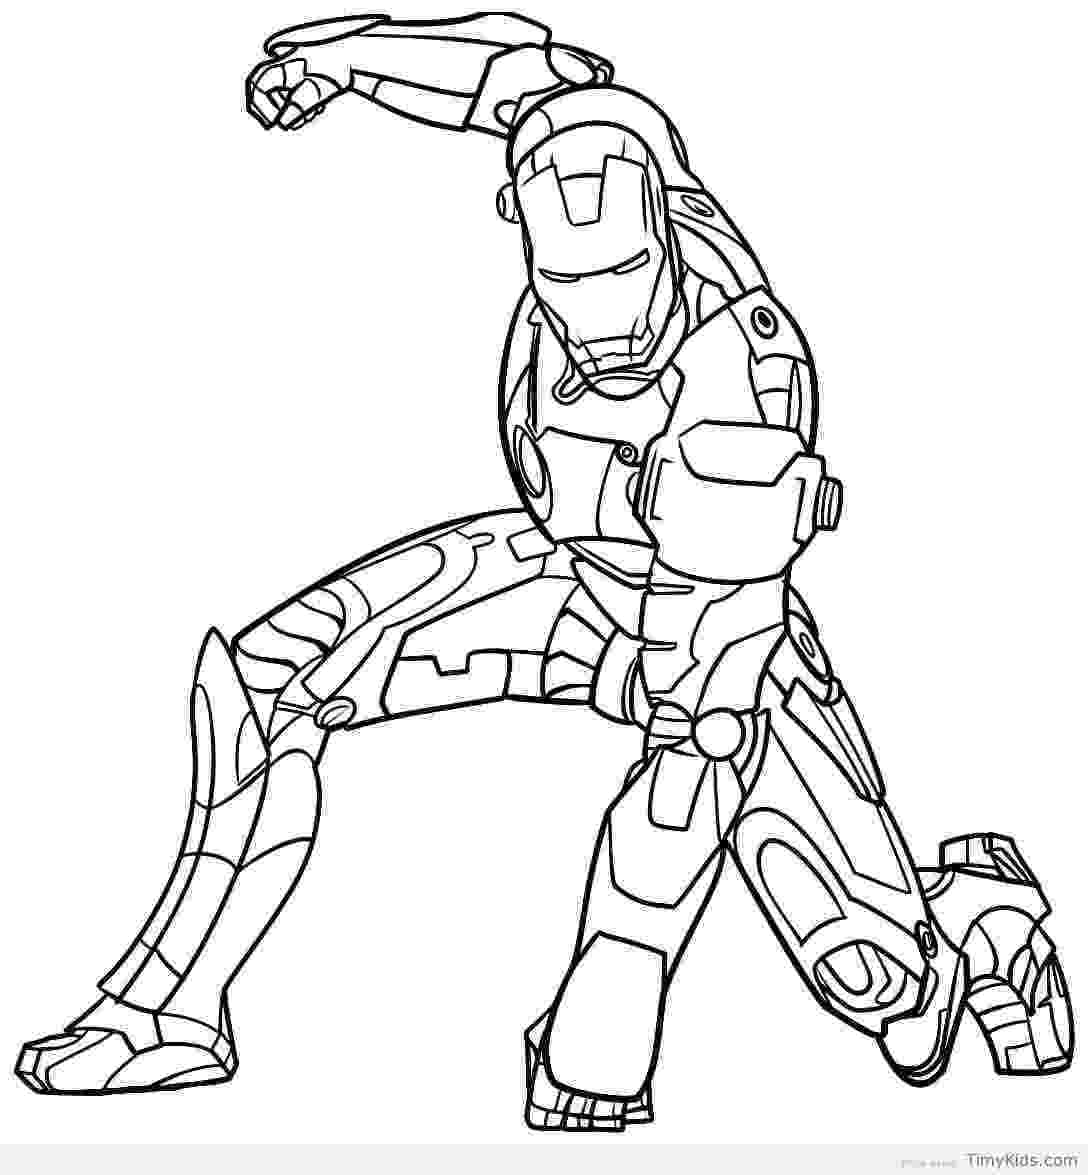 ironman coloring page top iron man coloring pages pdf thousand of the best page ironman coloring 